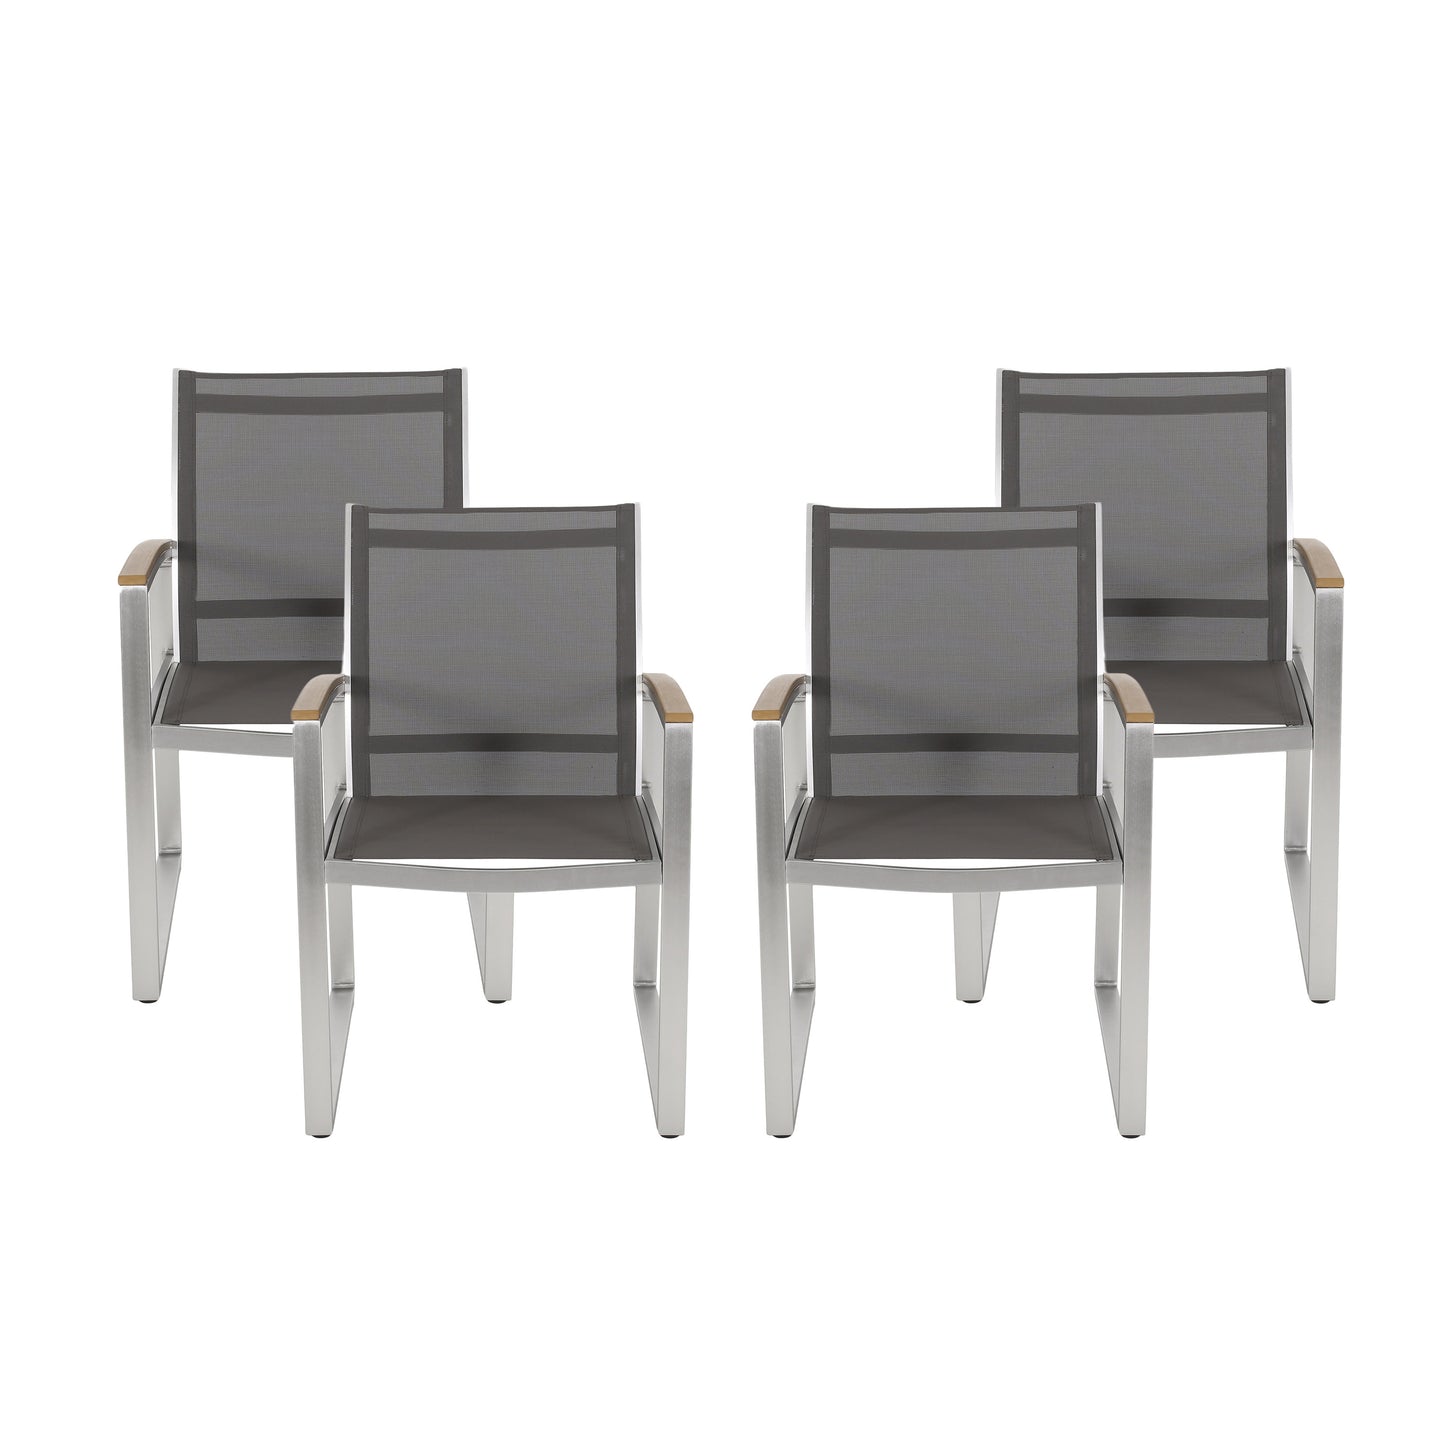 Aubrey Outdoor Aluminum Dining Chairs with Faux Wood Accents